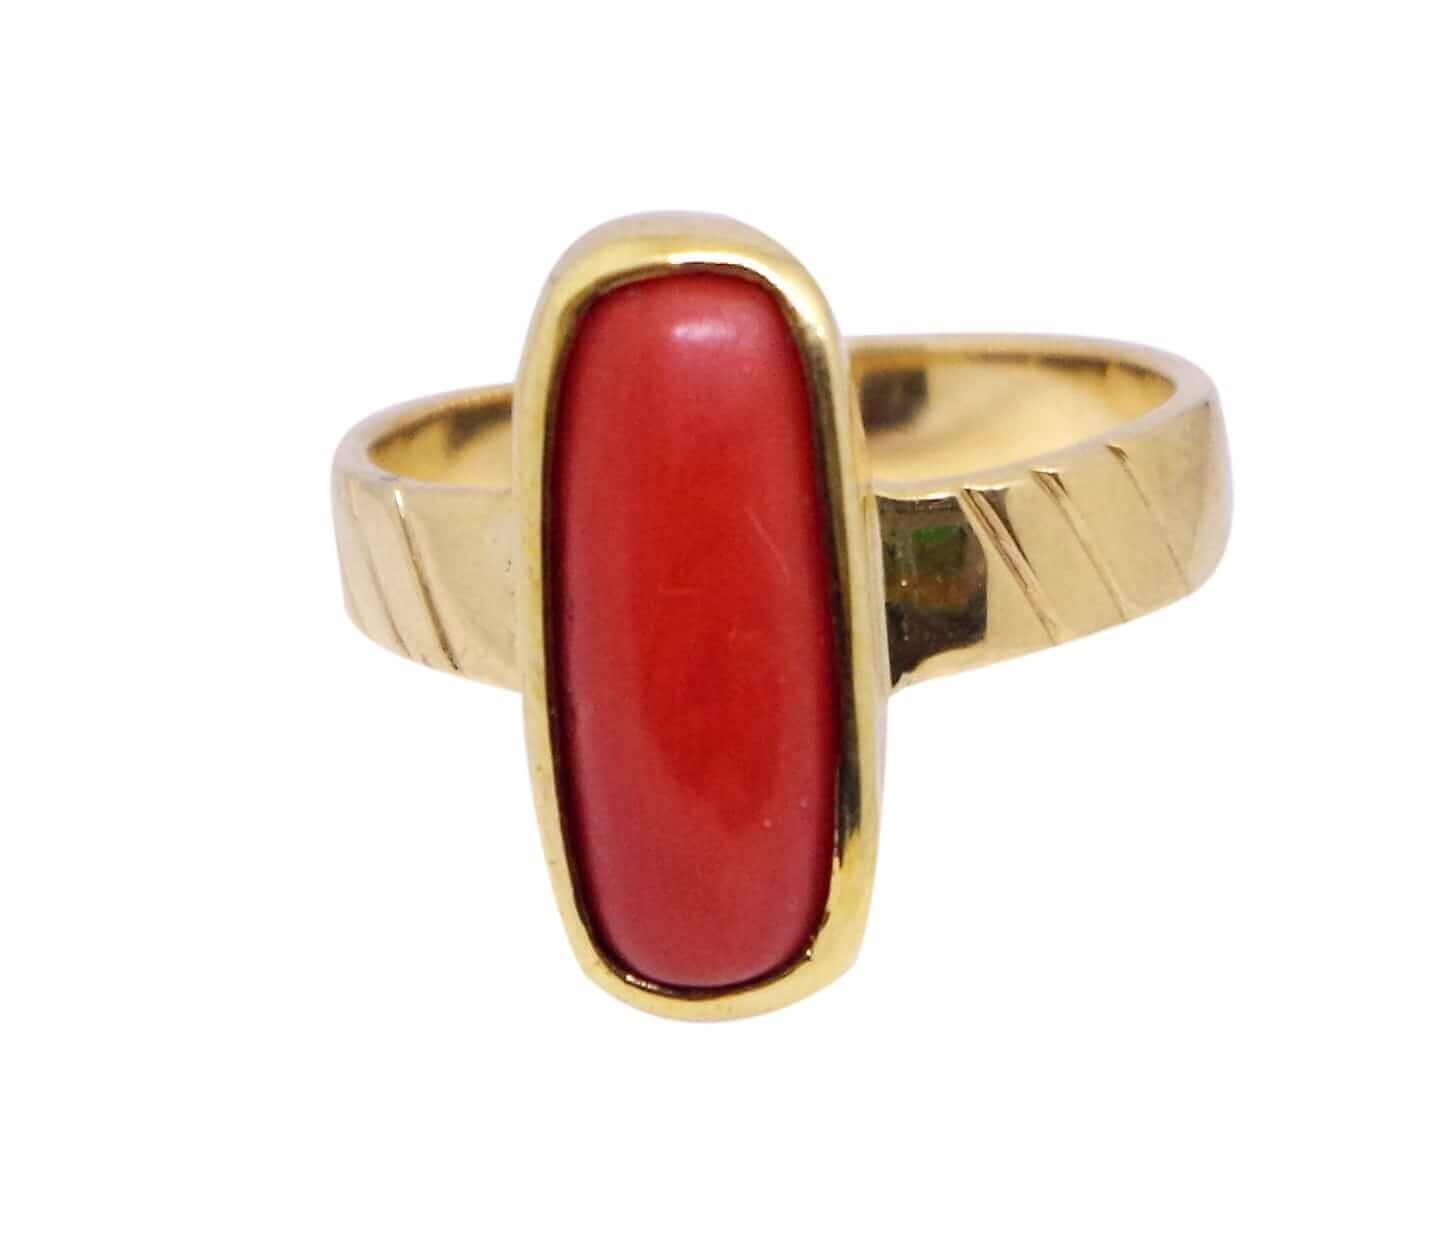 Vintage red coral gold ring - Rocks and Clocks